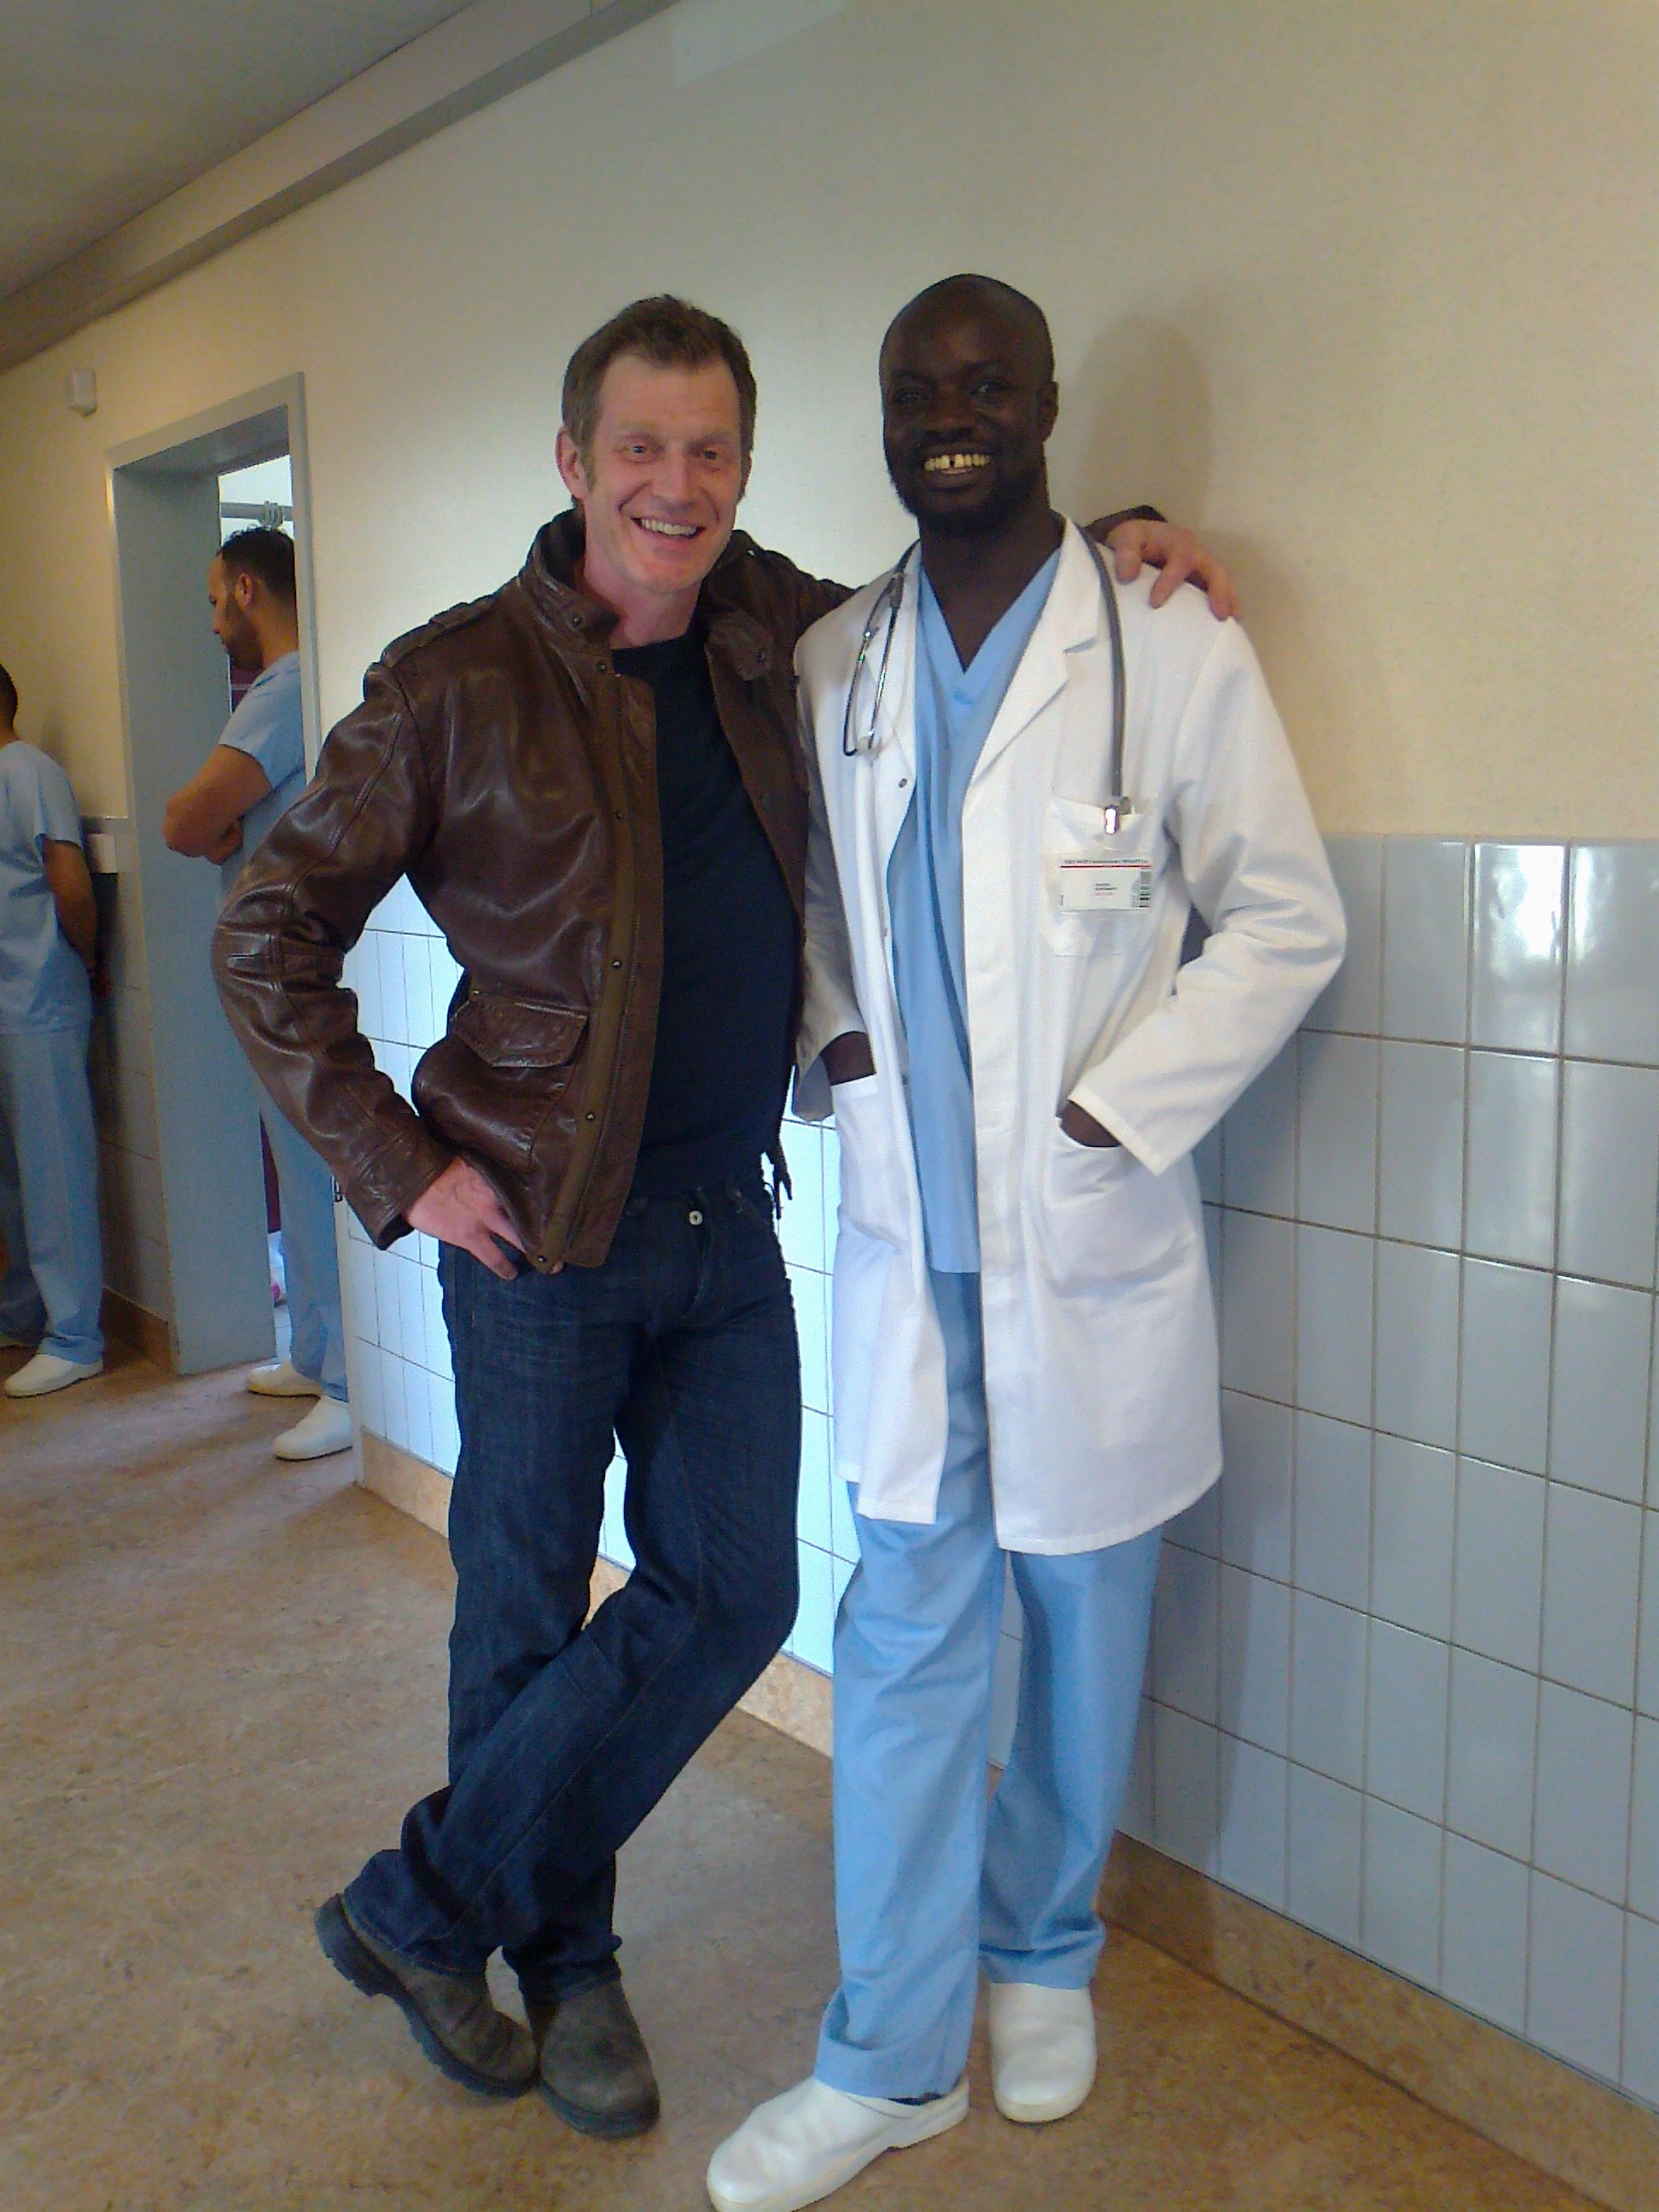 Enoch Frost as Dr Jefferson with Jason Flemyng as Mark in 'The Missing'.